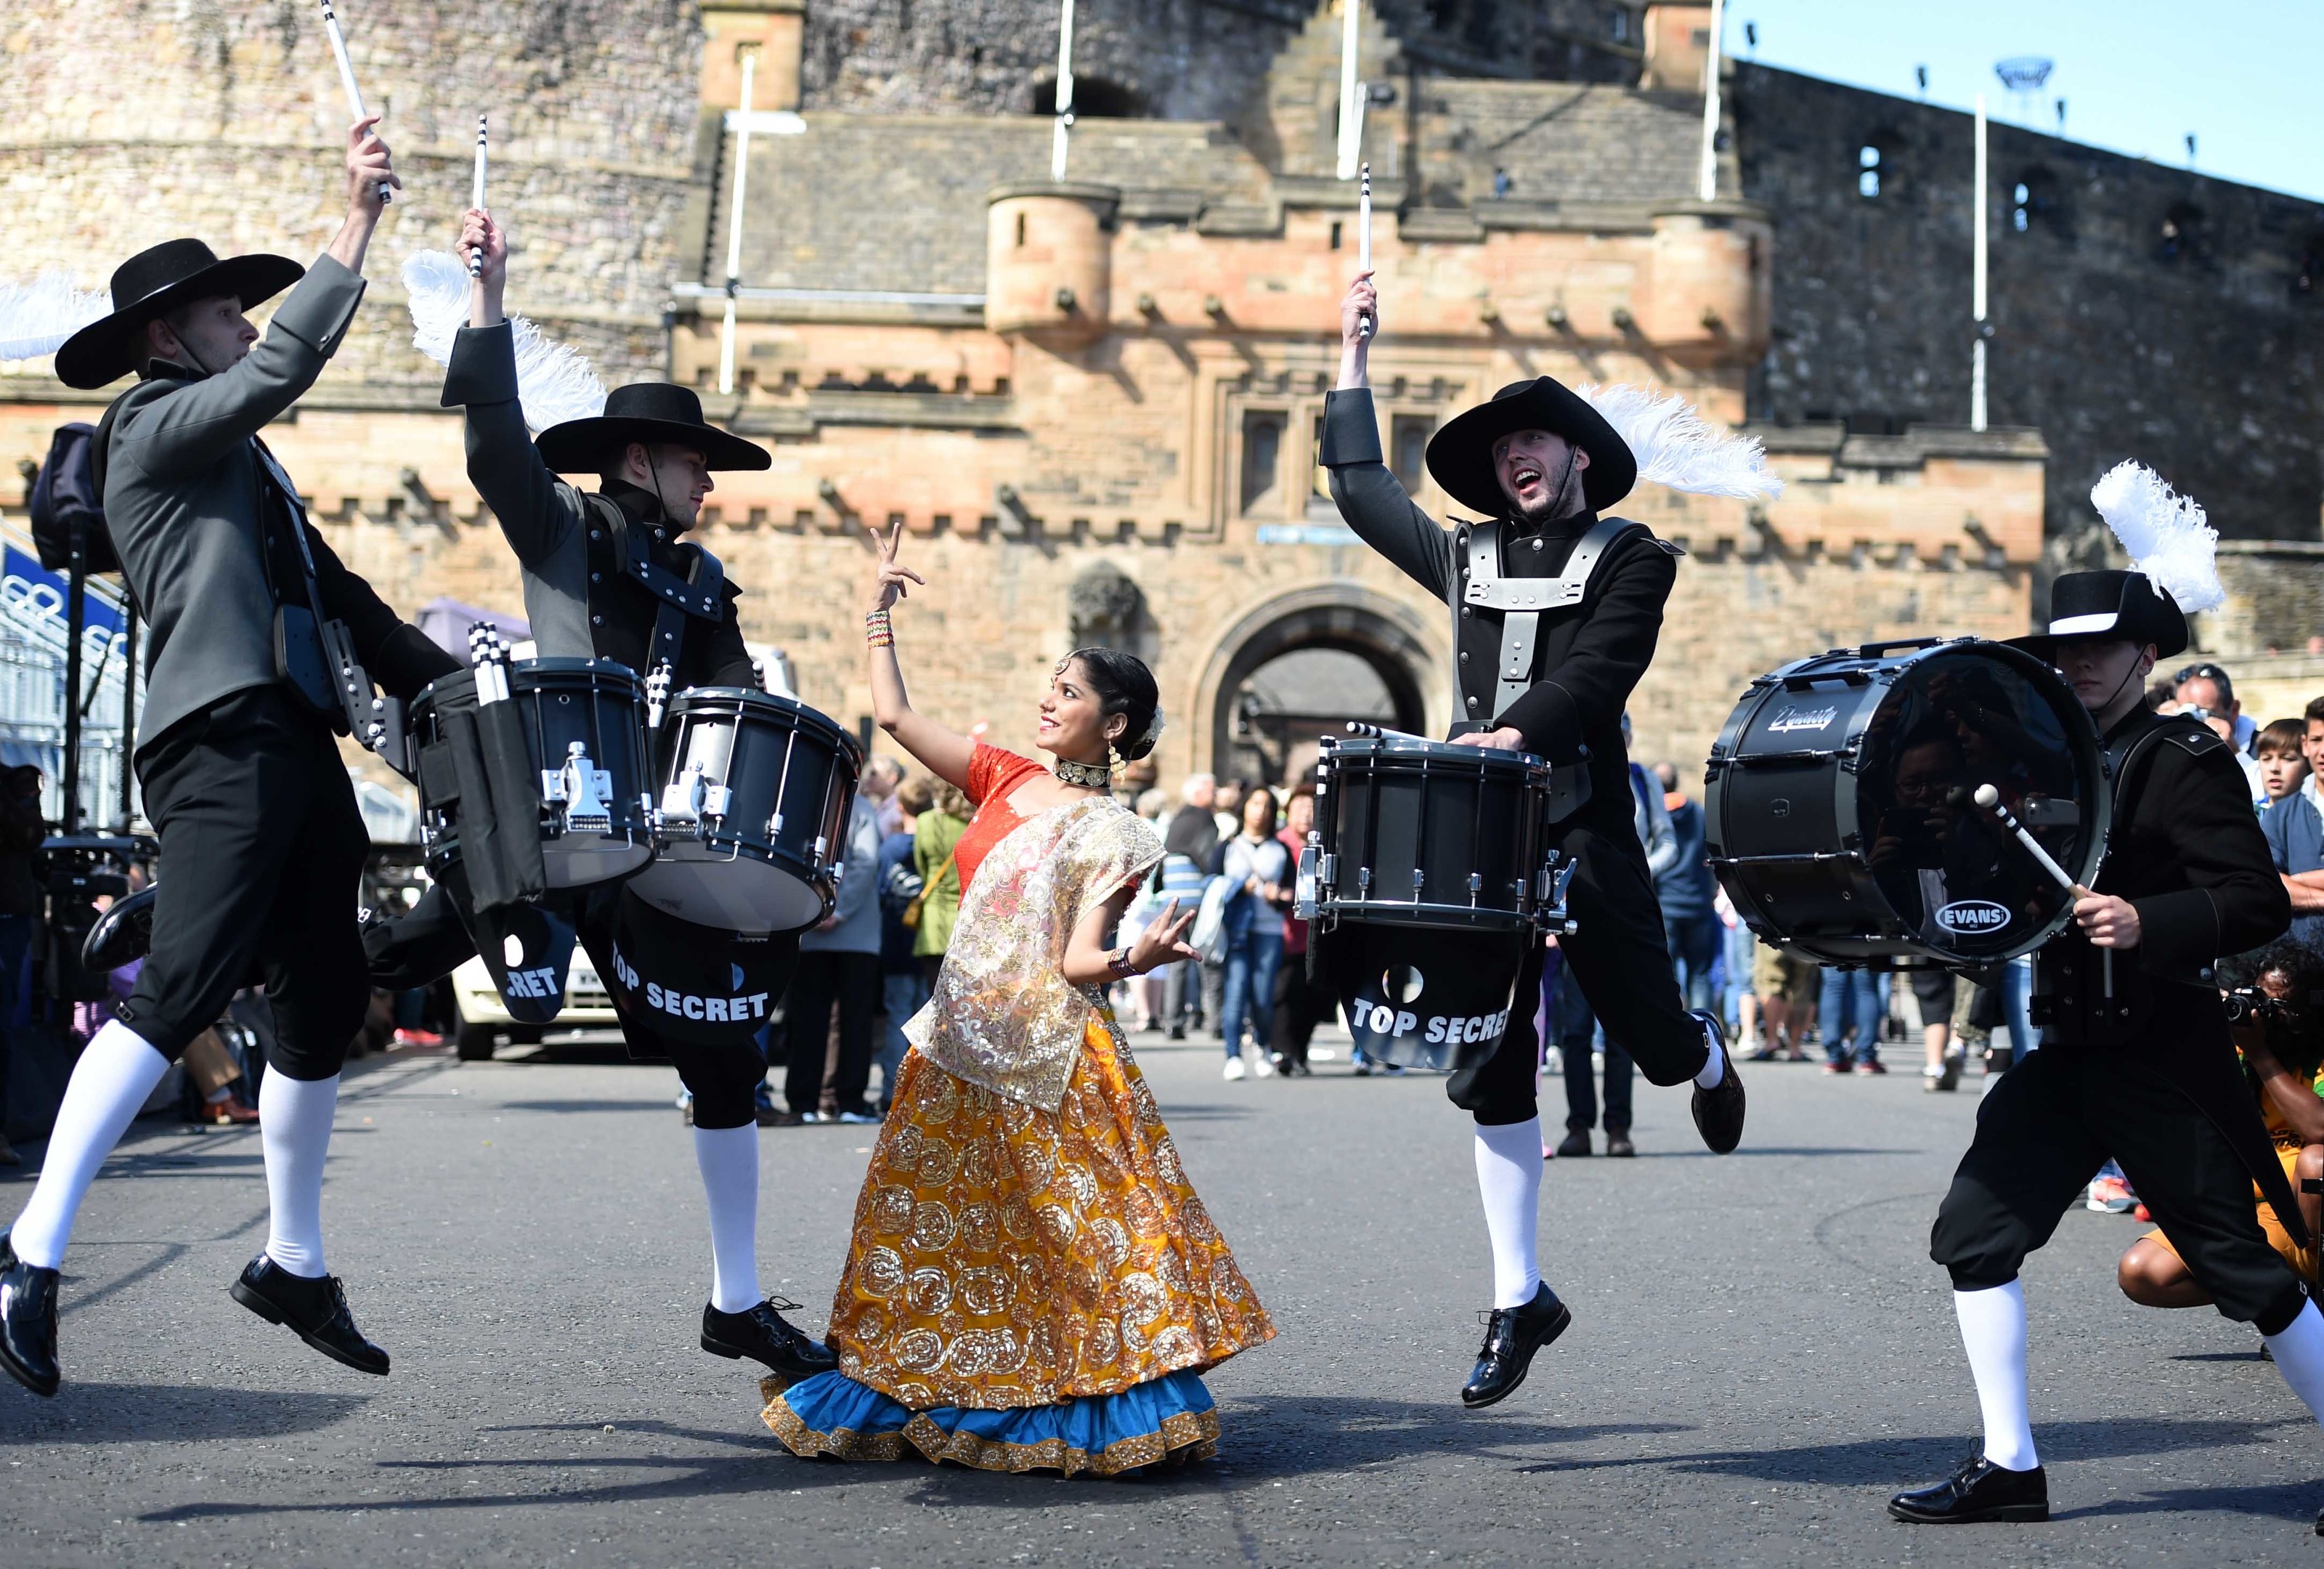 Bollywood meets Top Secret Drums at the launch of the 2015 Royal Edinburgh Military Tattoo.  East Meets West 